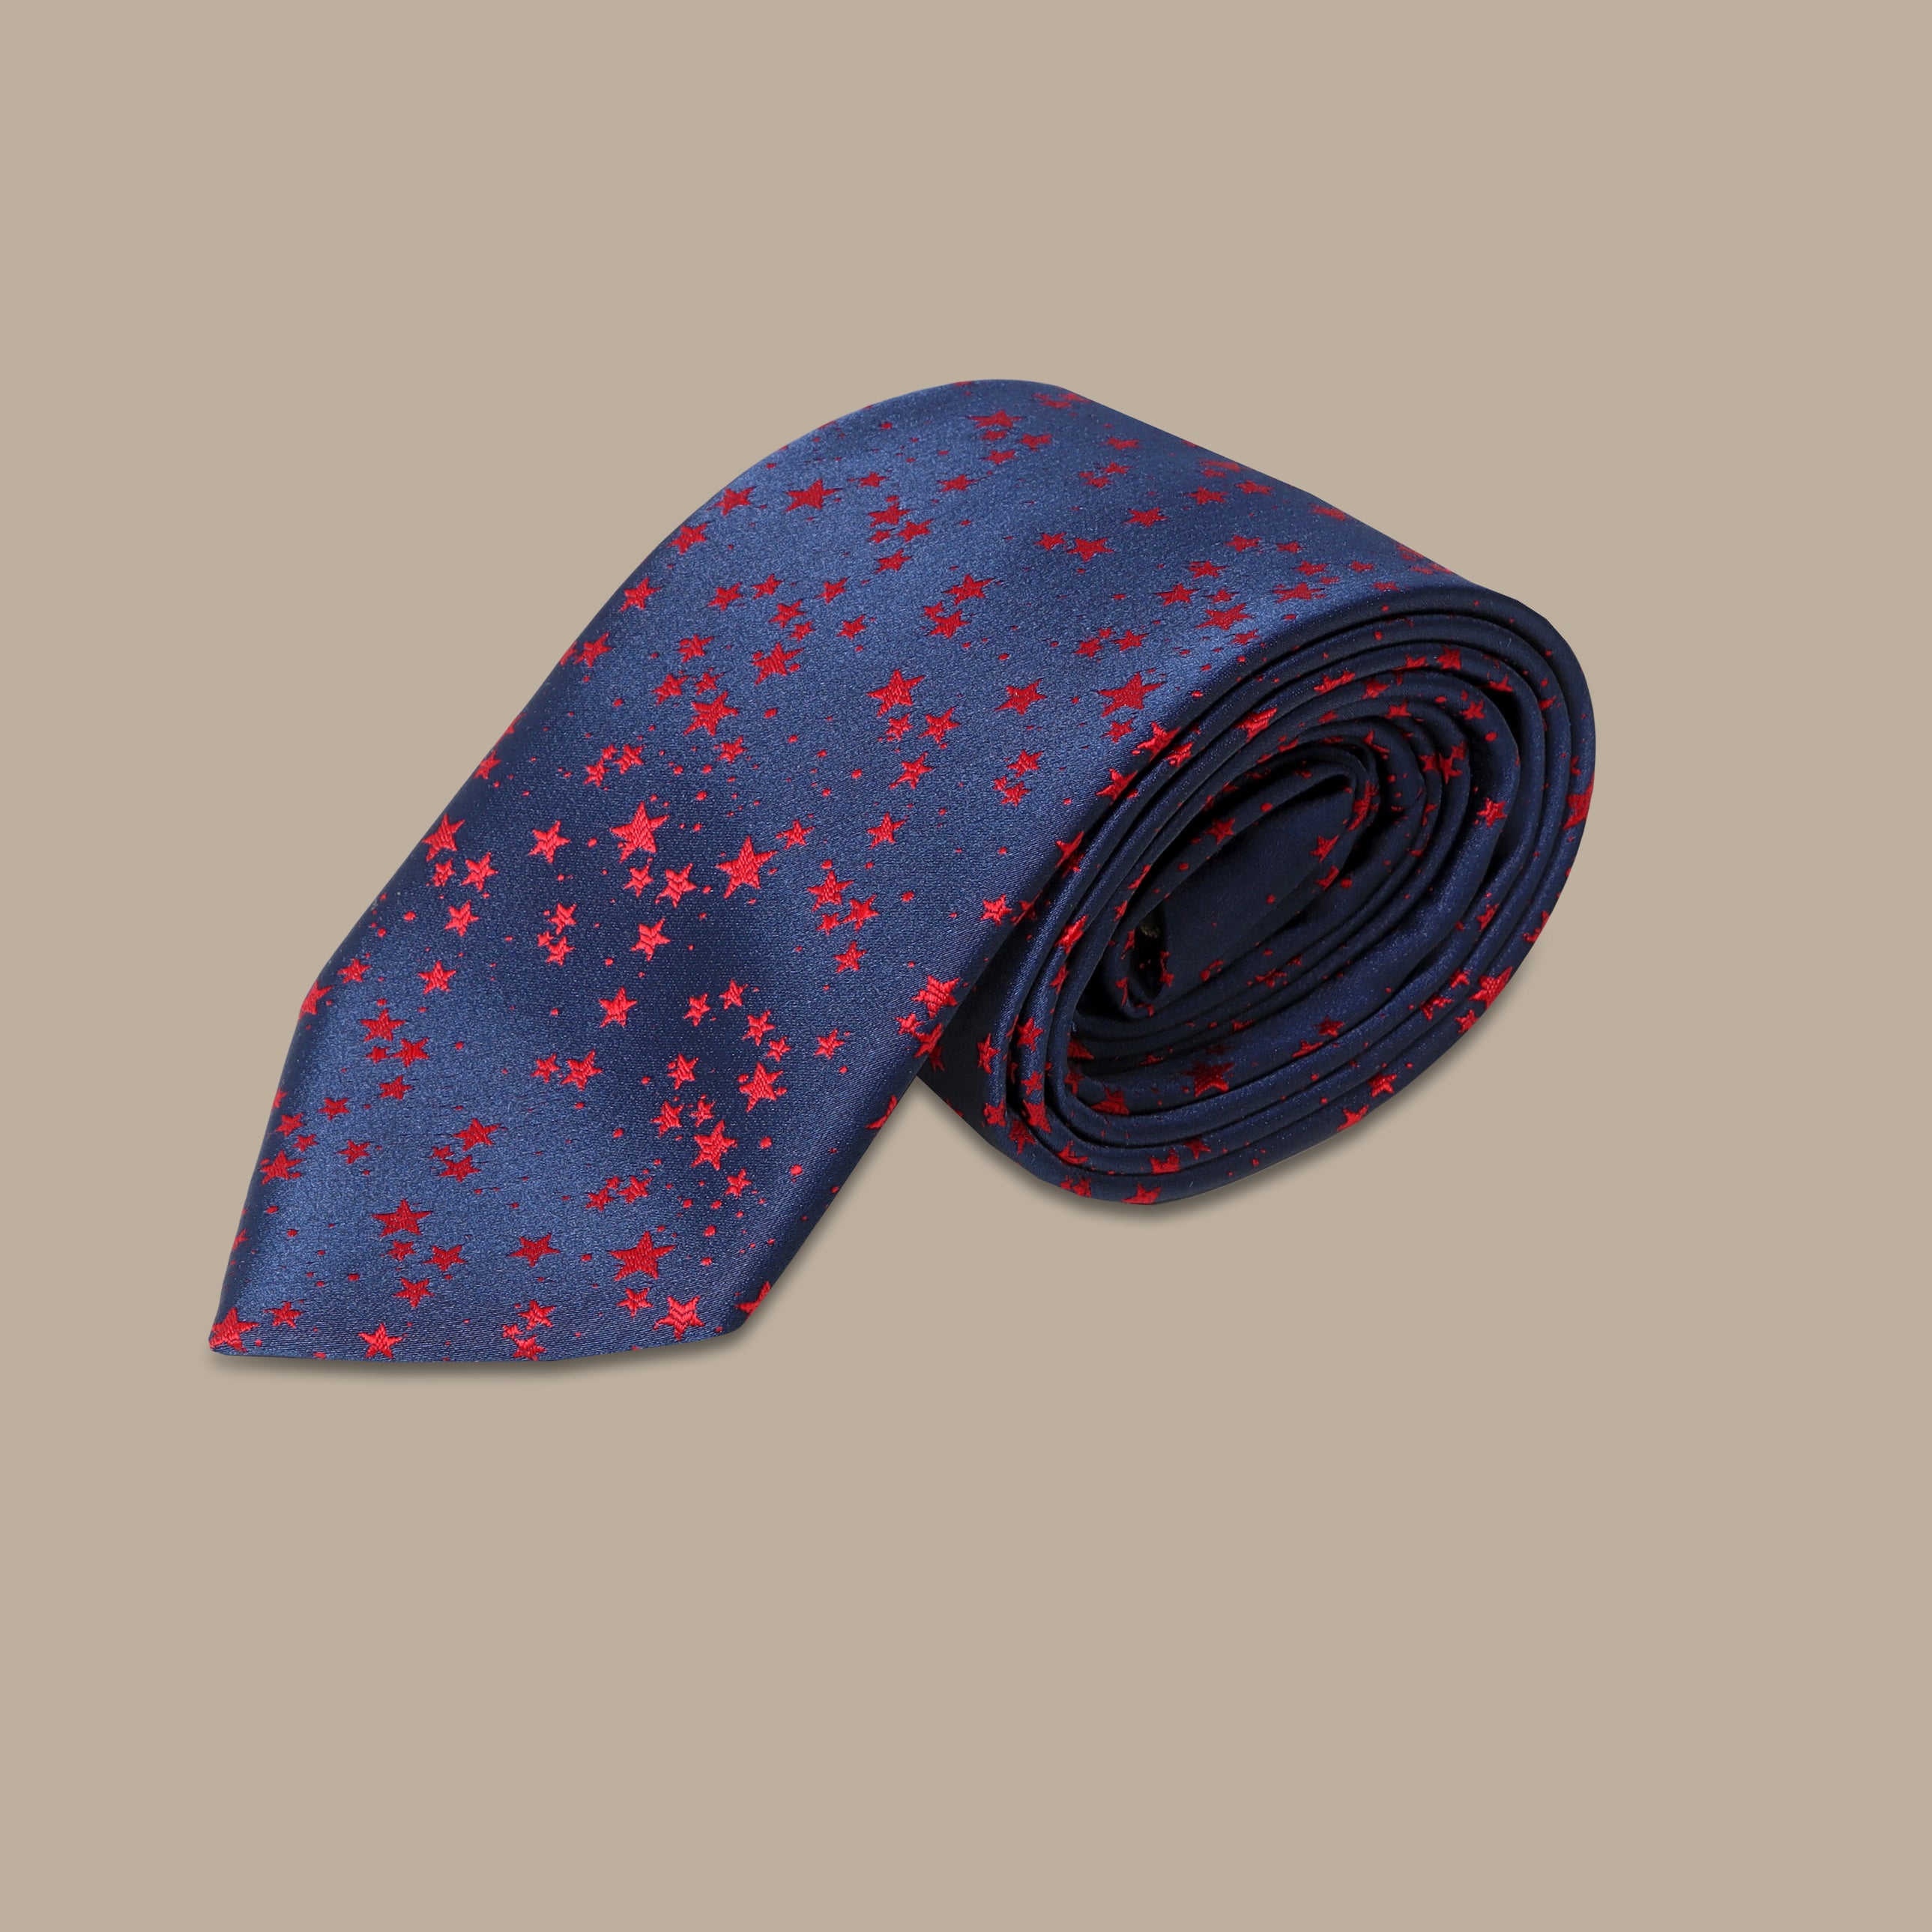 Vintage Flair: Navy Blue and Red Stars Print Tie